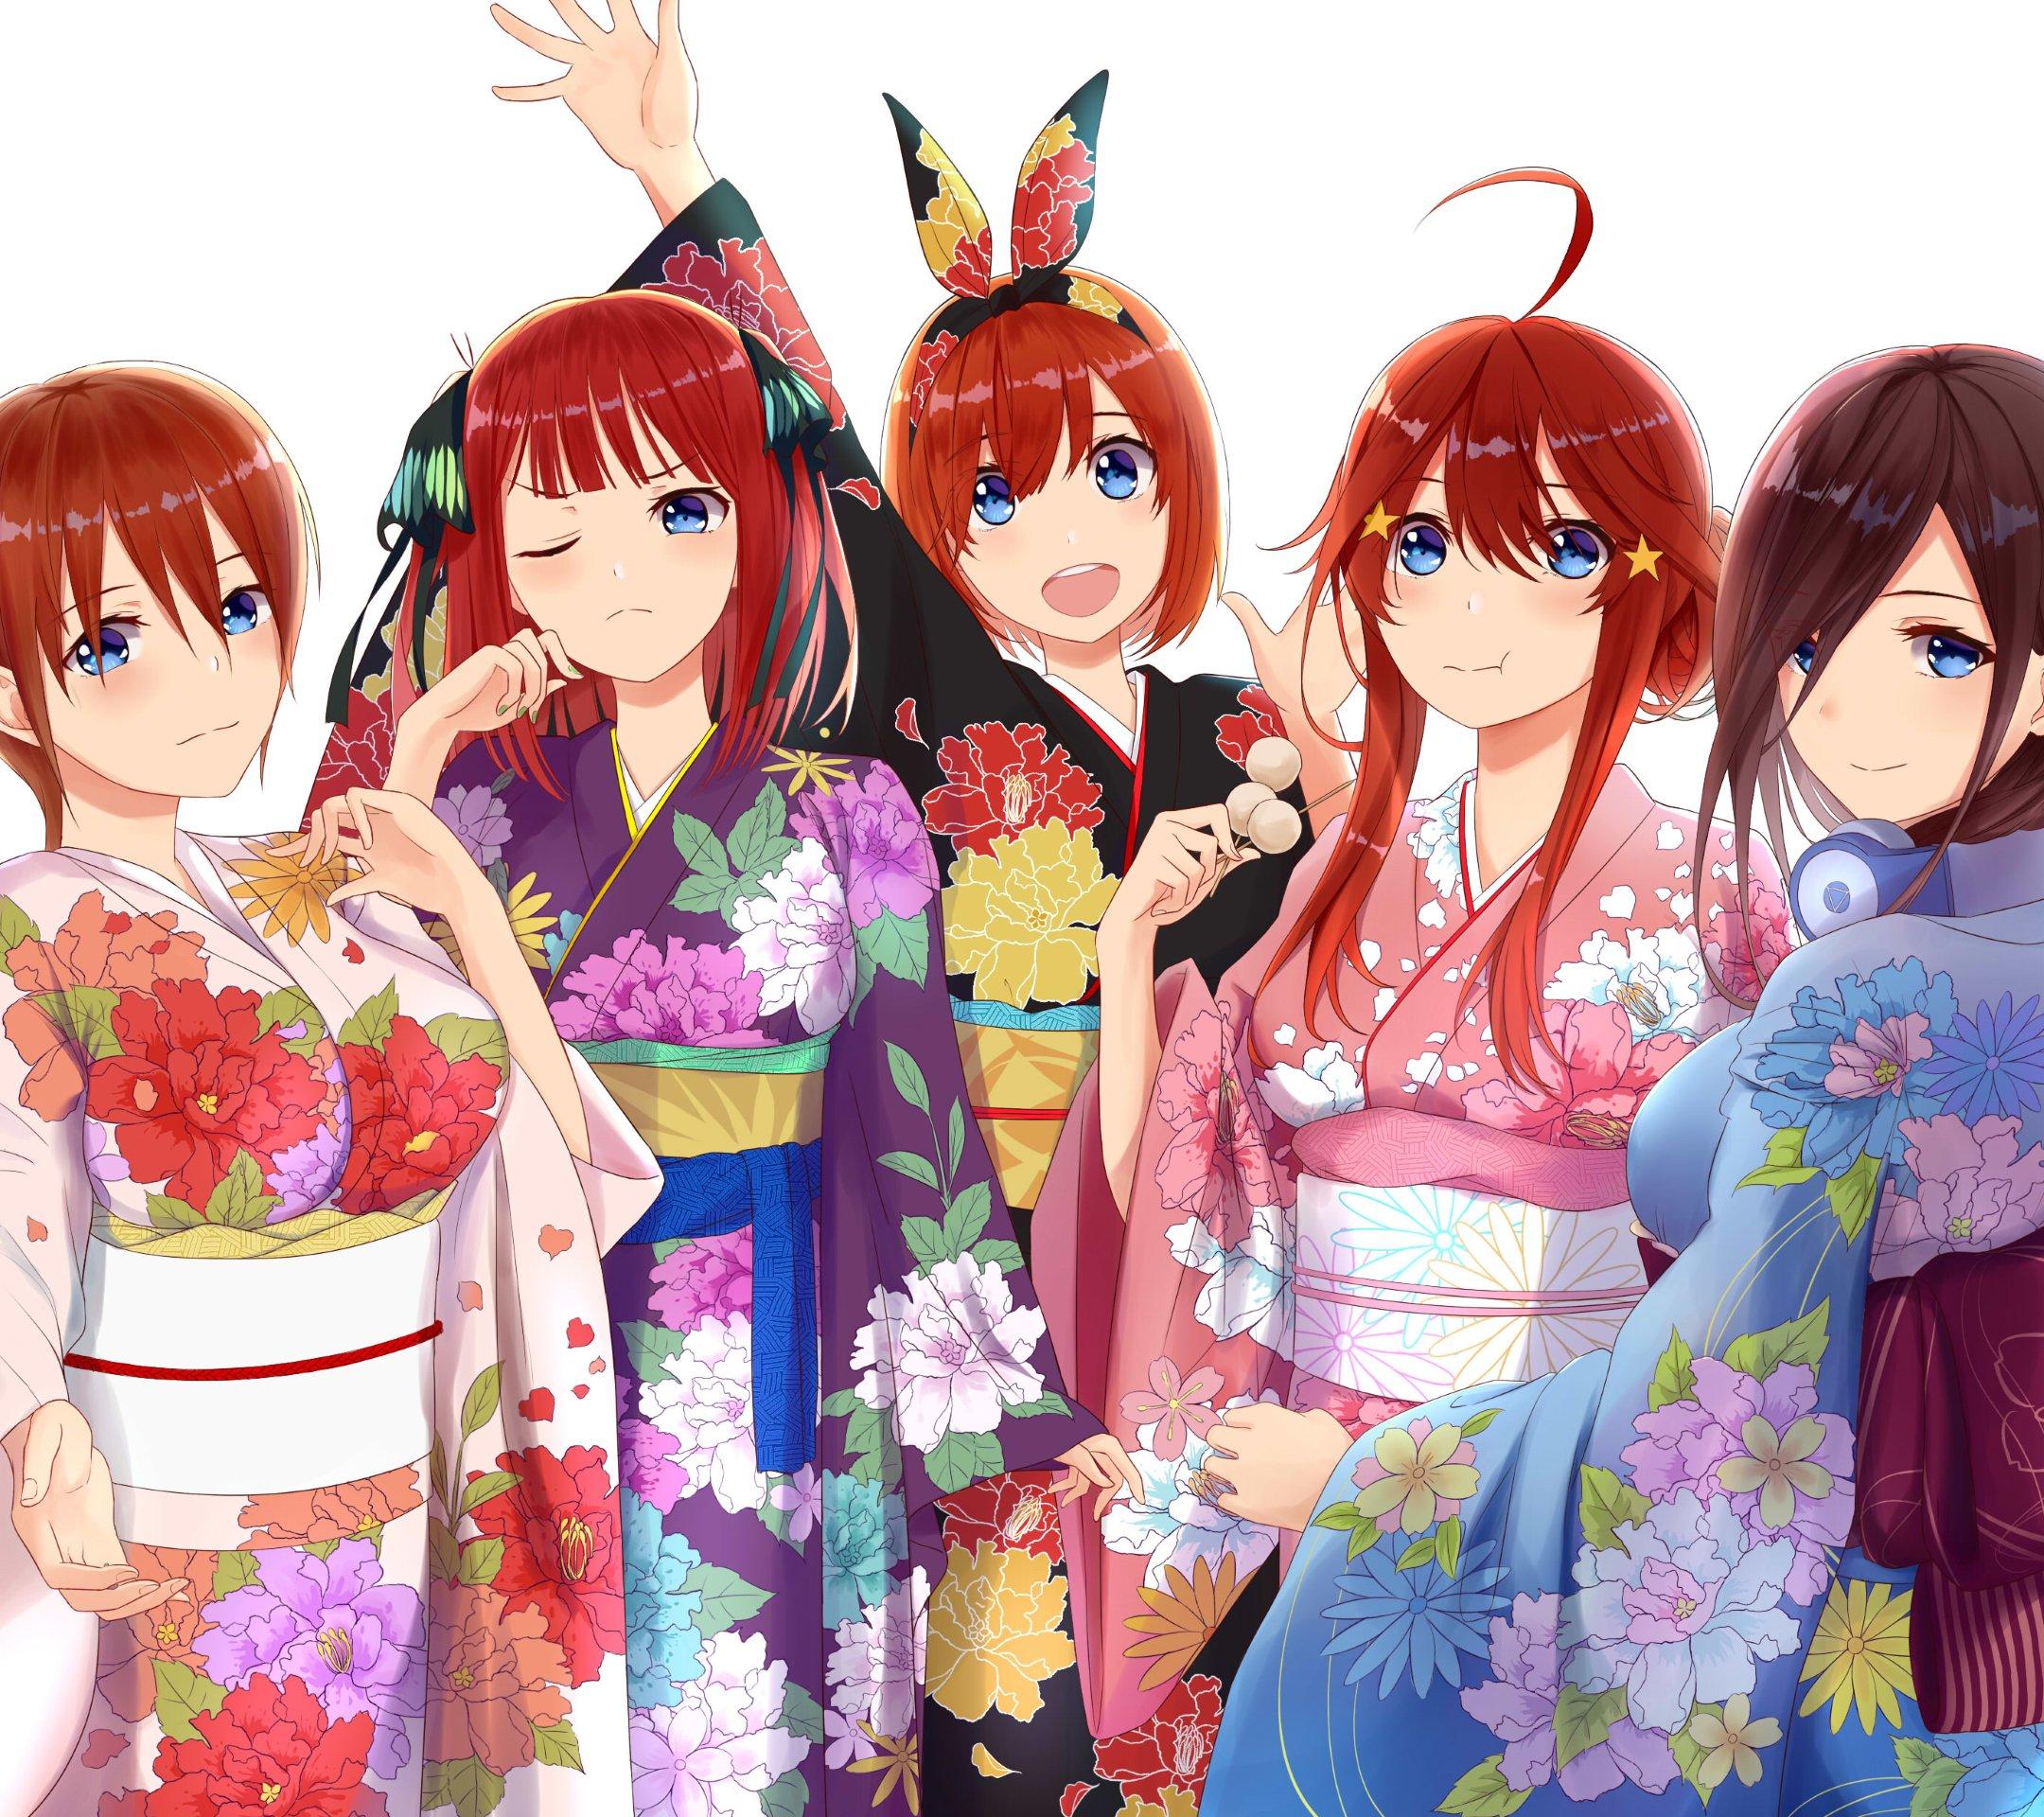 The Quintessential Quintuplets anime wallpaper for mobile phones